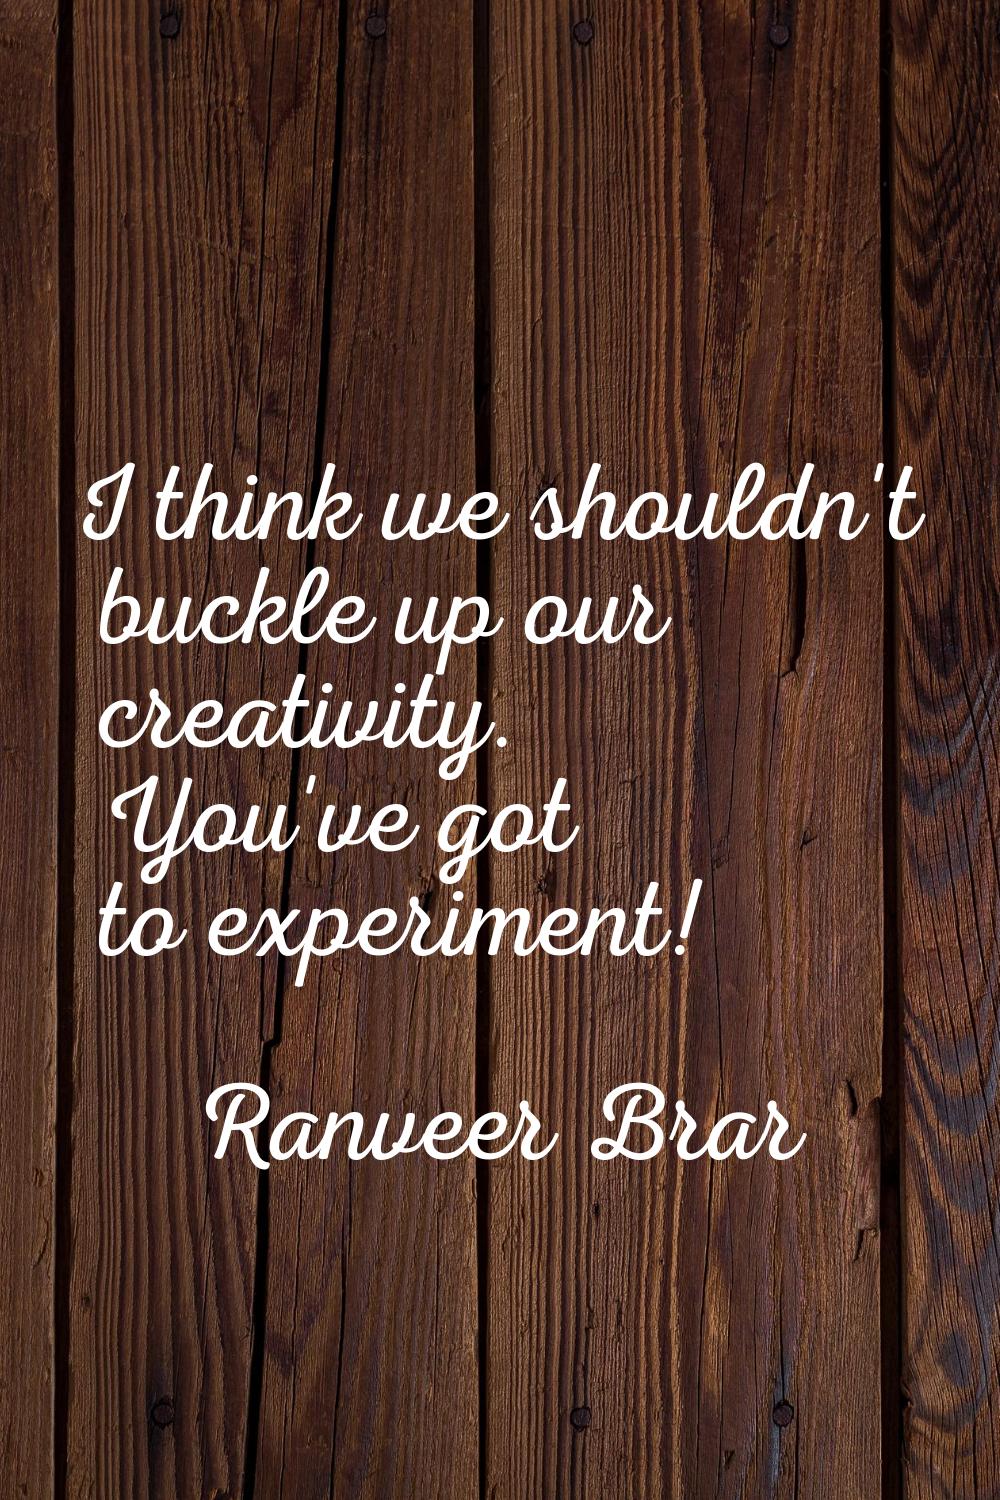 I think we shouldn't buckle up our creativity. You've got to experiment!